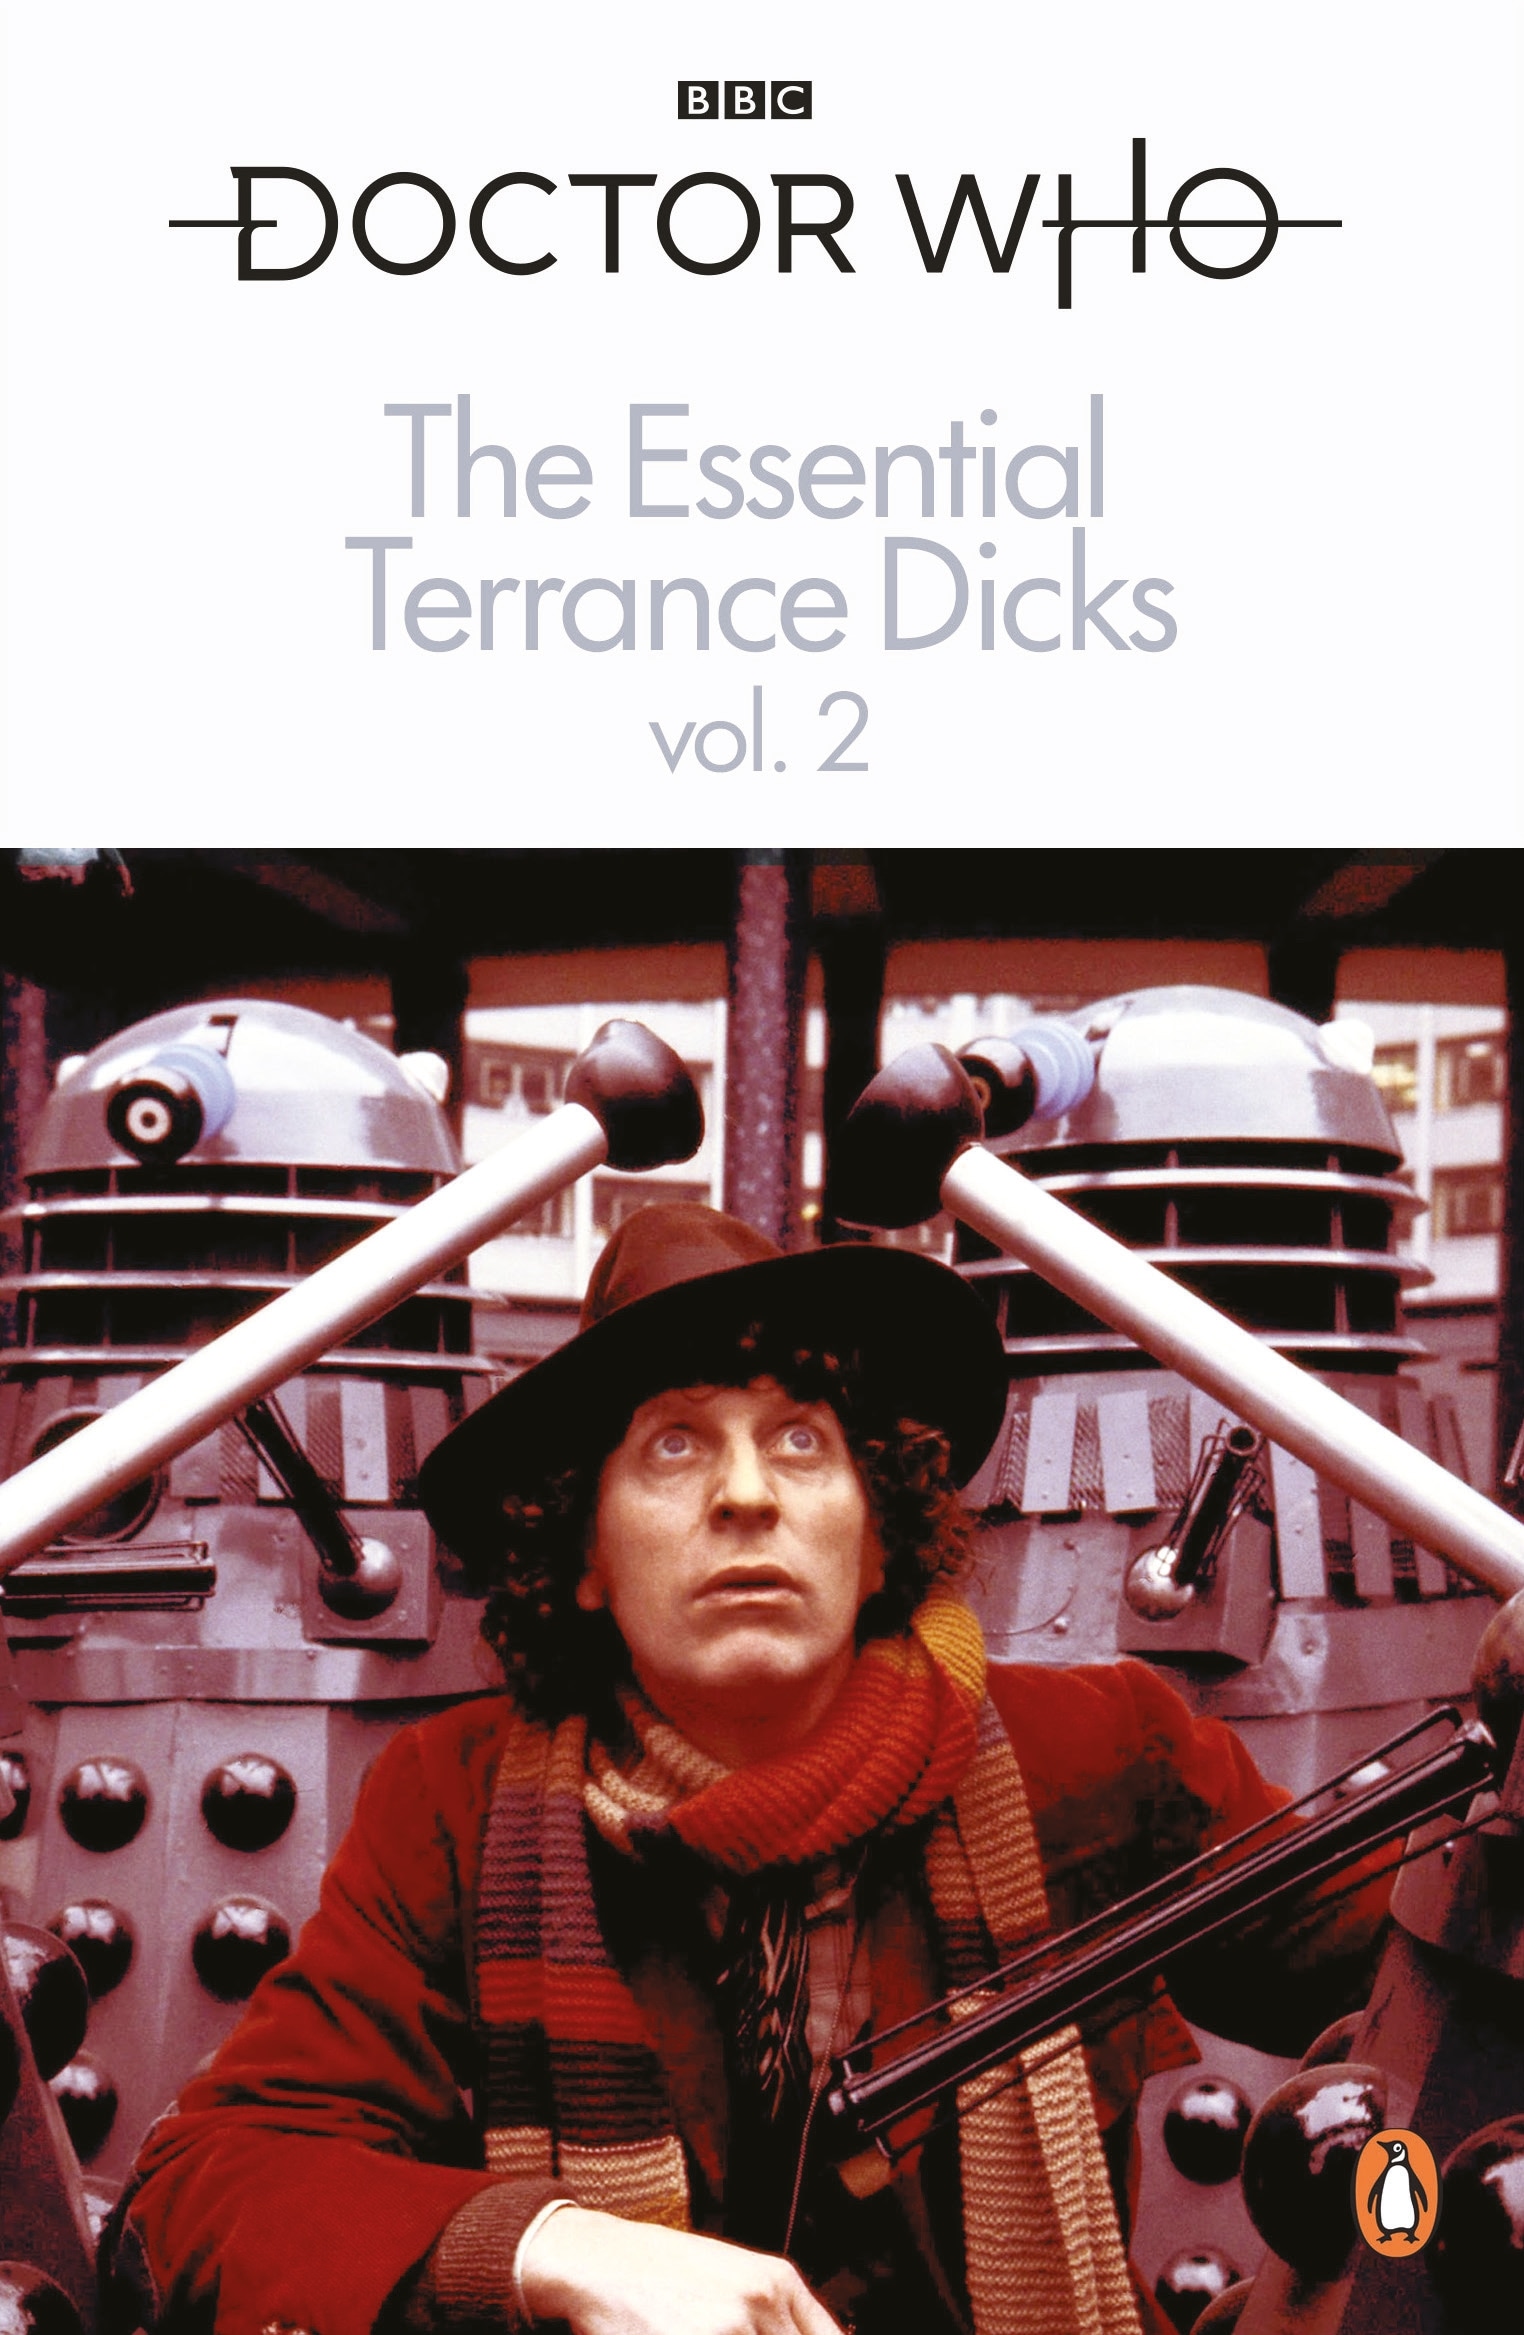 Book “The Essential Terrance Dicks Volume 2” by Terrance Dicks — May 5, 2022